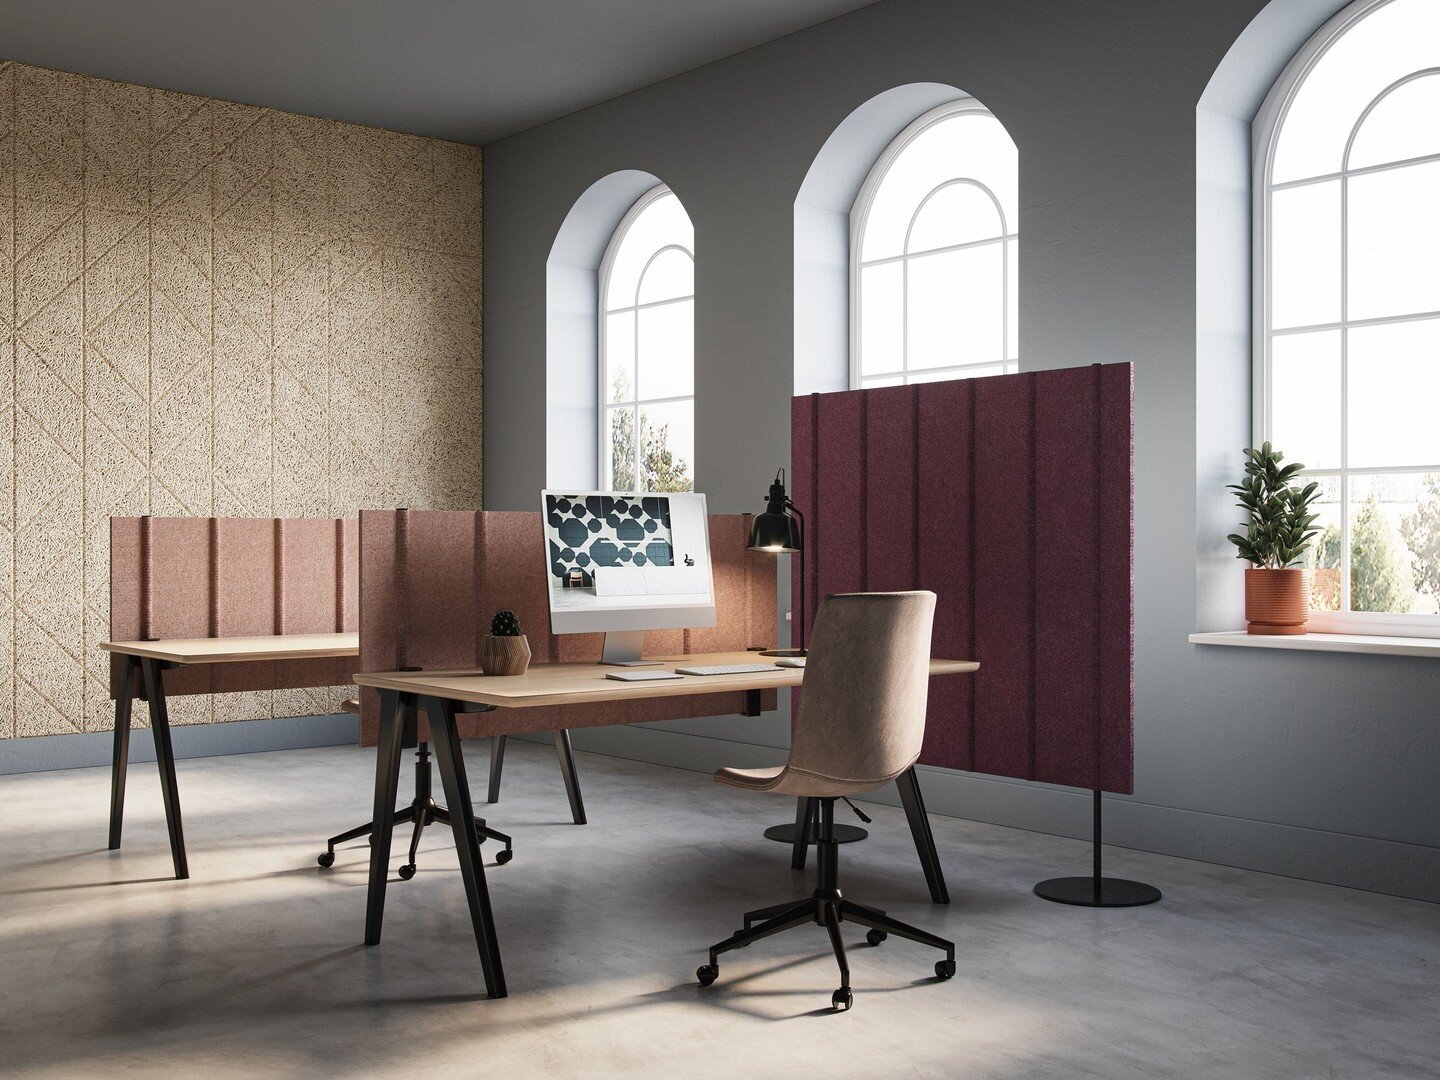 Baux extend their post-consumer waste collection FELT - with new colours!⁠
⁠
Learn more at www.baux.com or visit @bauxdesign⁠
⁠
Design by @formuswithlove the FELT collection uses reclaimed waste to produce PET screens without the use of glue. The mon